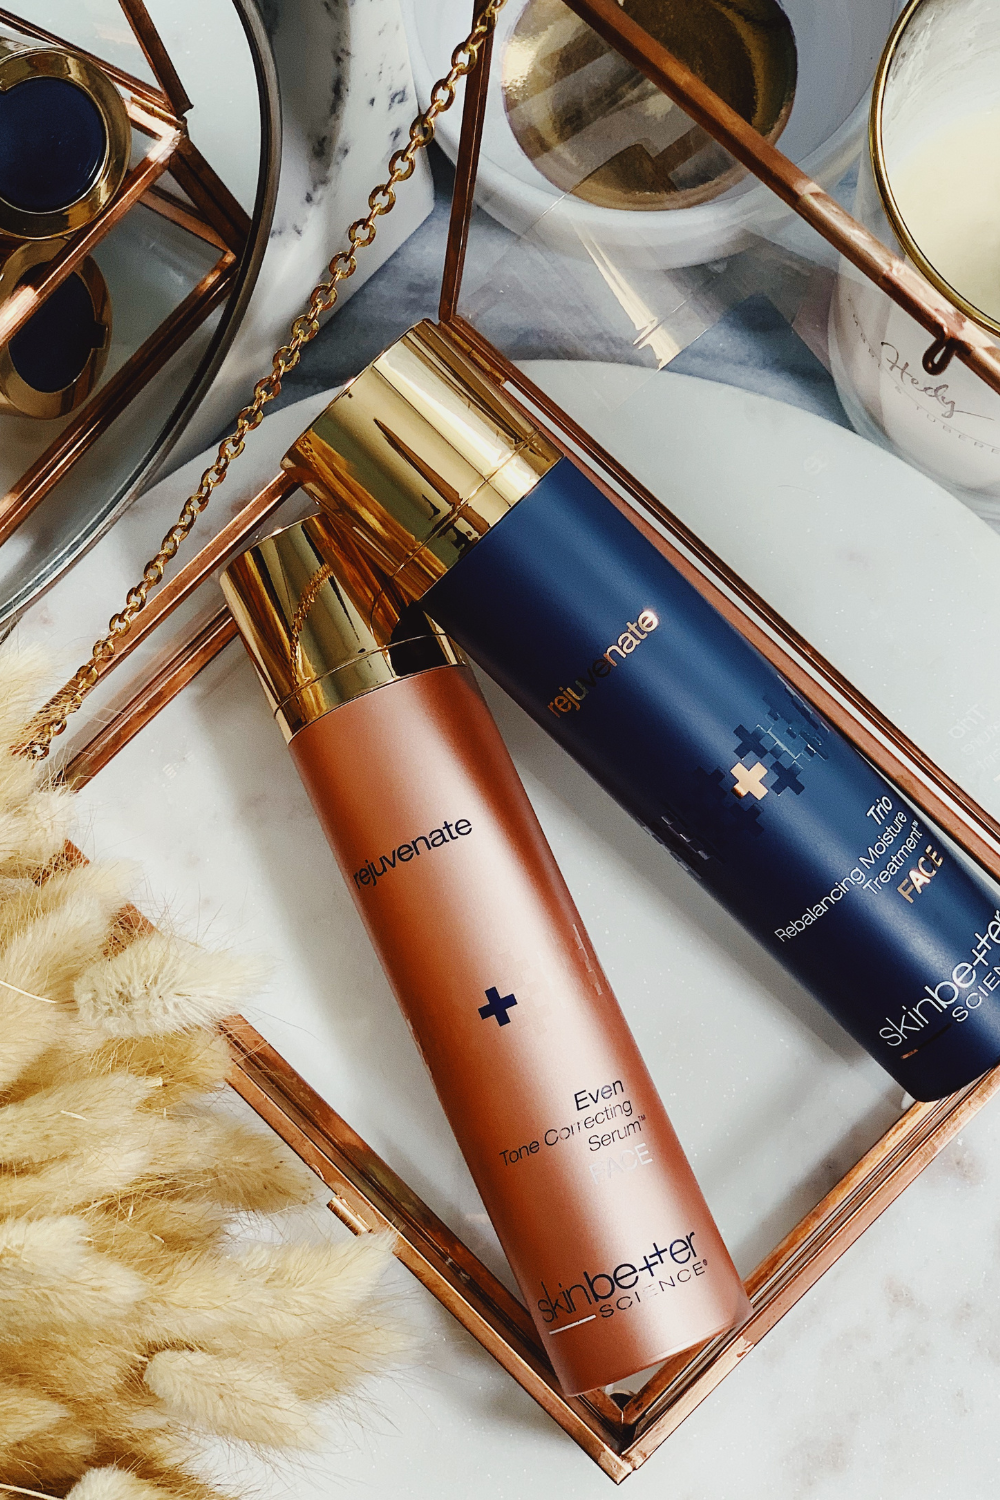 SkinBetter Science Even Tone Correcting Serum and Trio Rebalancing Moisture Treatment displayed on a marble surface with gold accents.